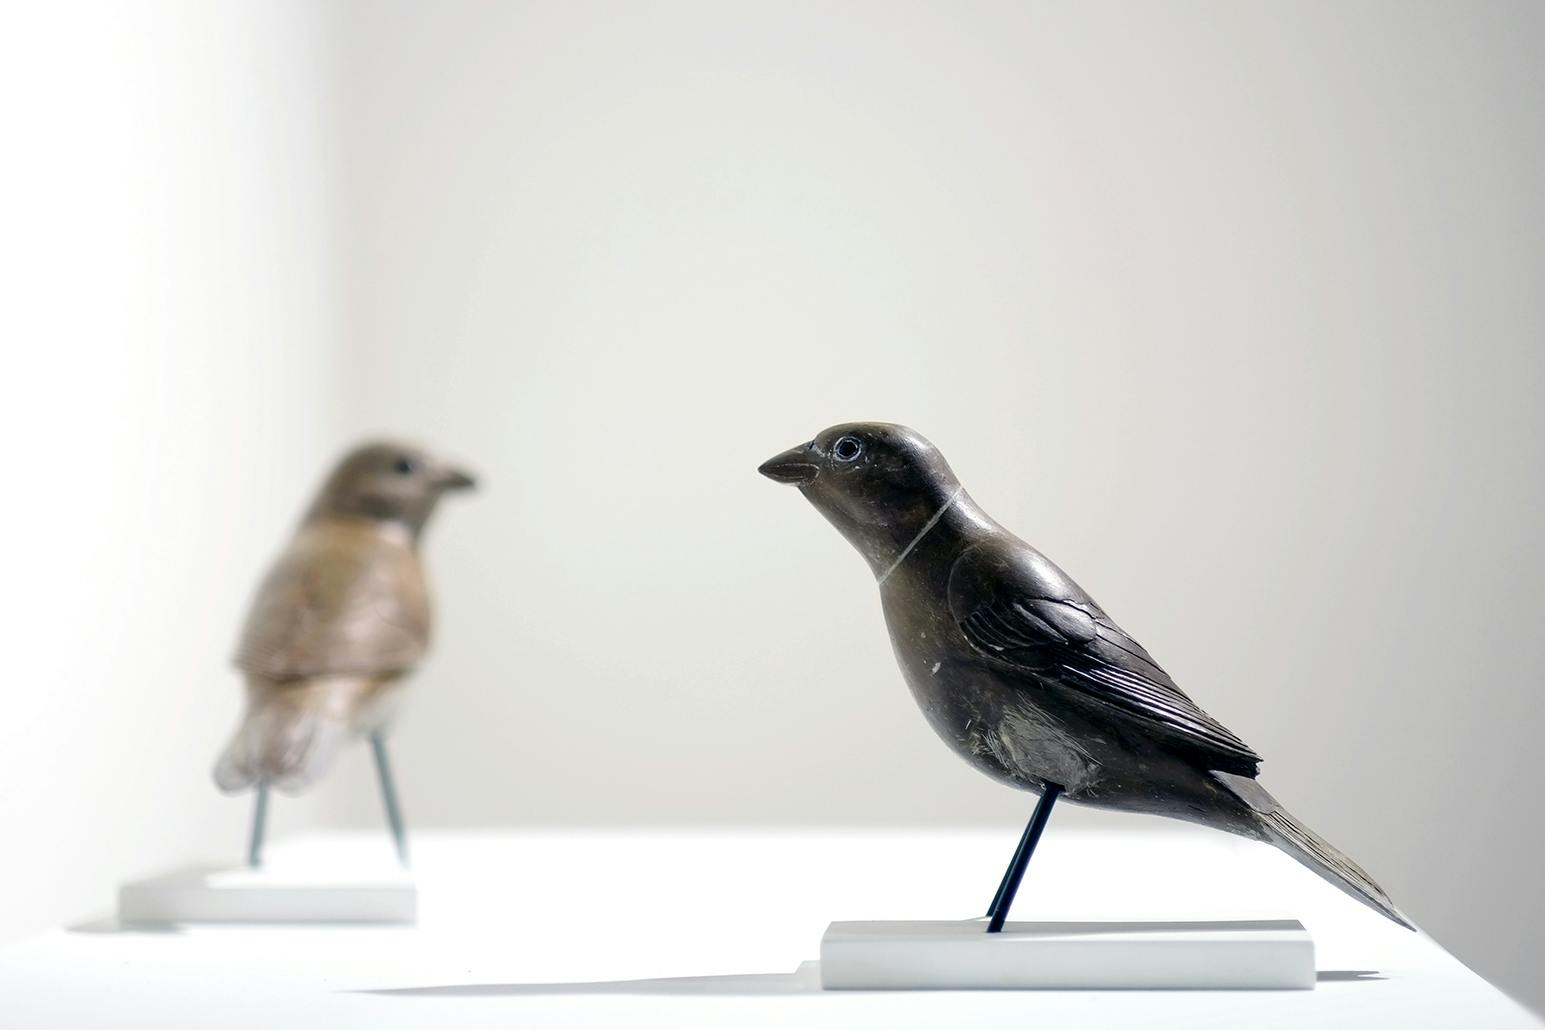 Two small scale metal birds sit on top of a plinth. The bird in the foreground is dark brown and in clear focus, the one in the background a lighter shade of brown and blurred.